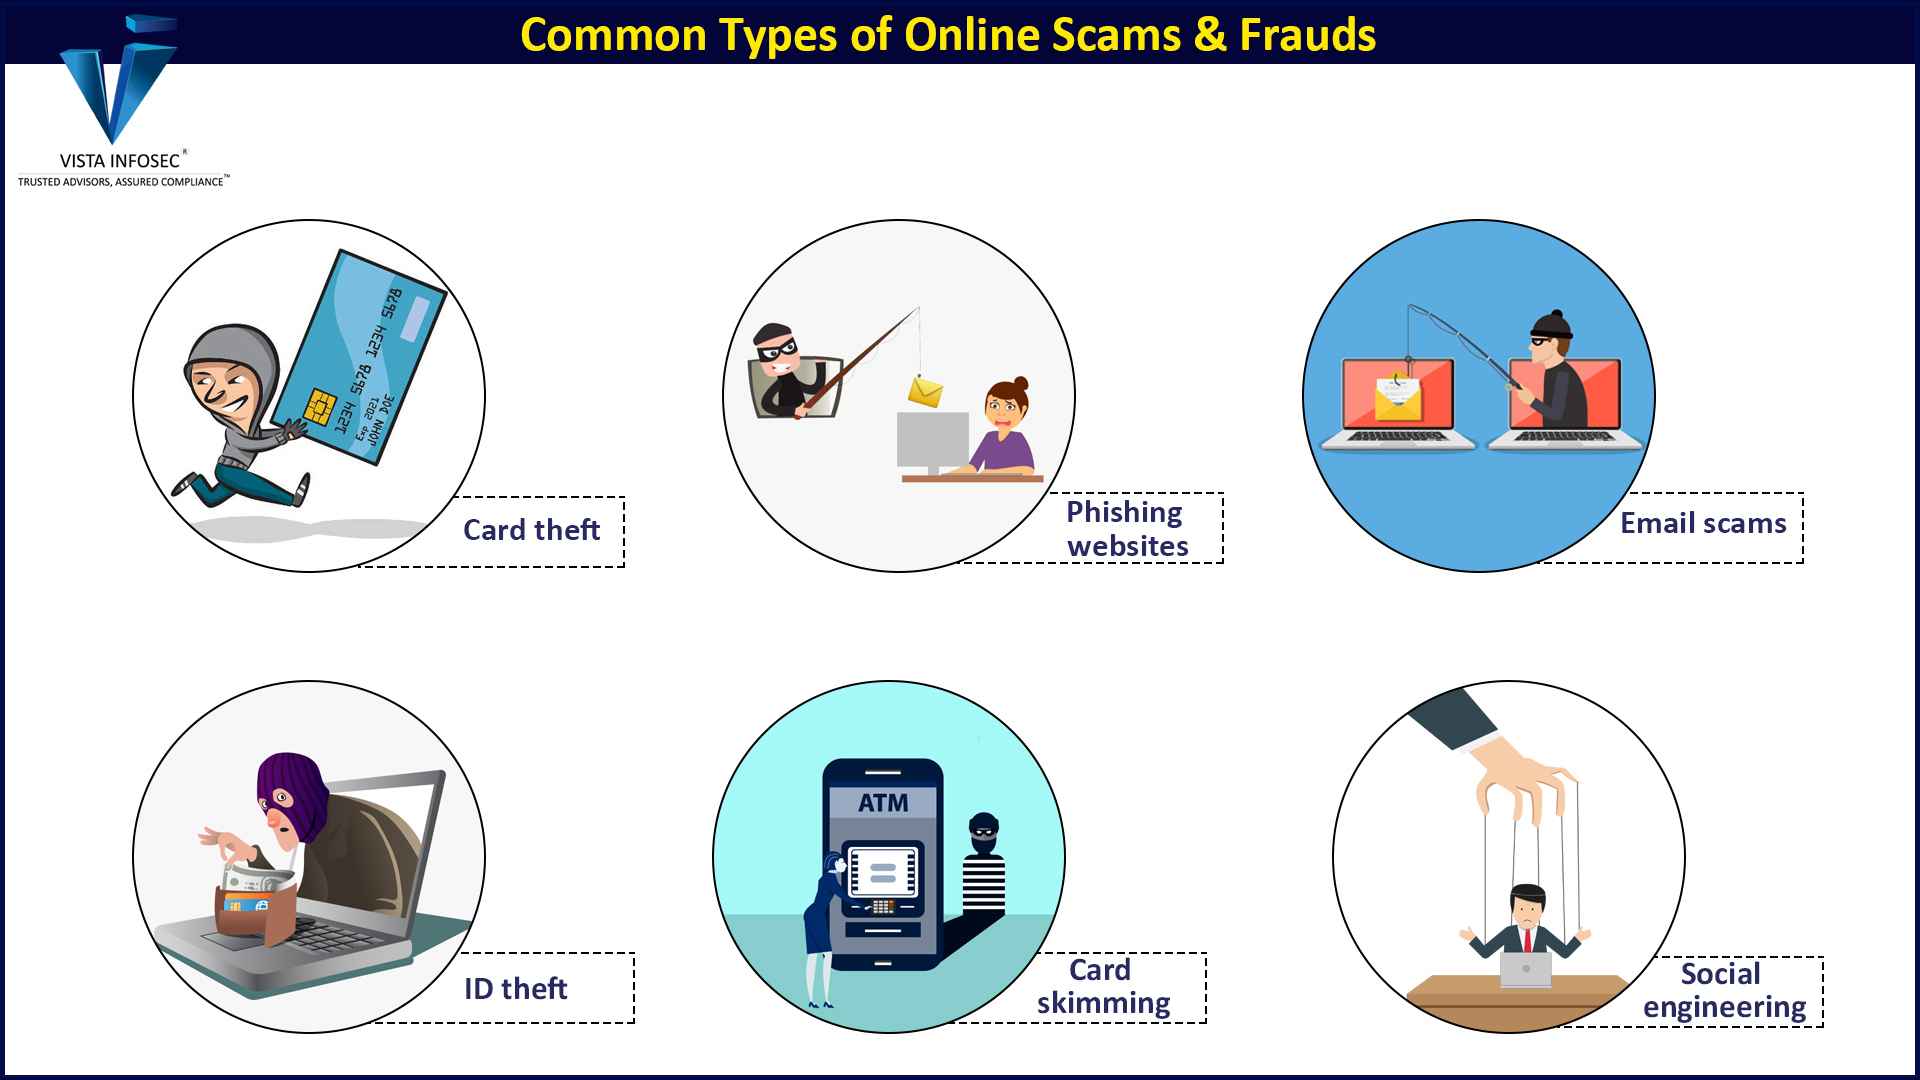 Common Types of Online Scams and Frauds